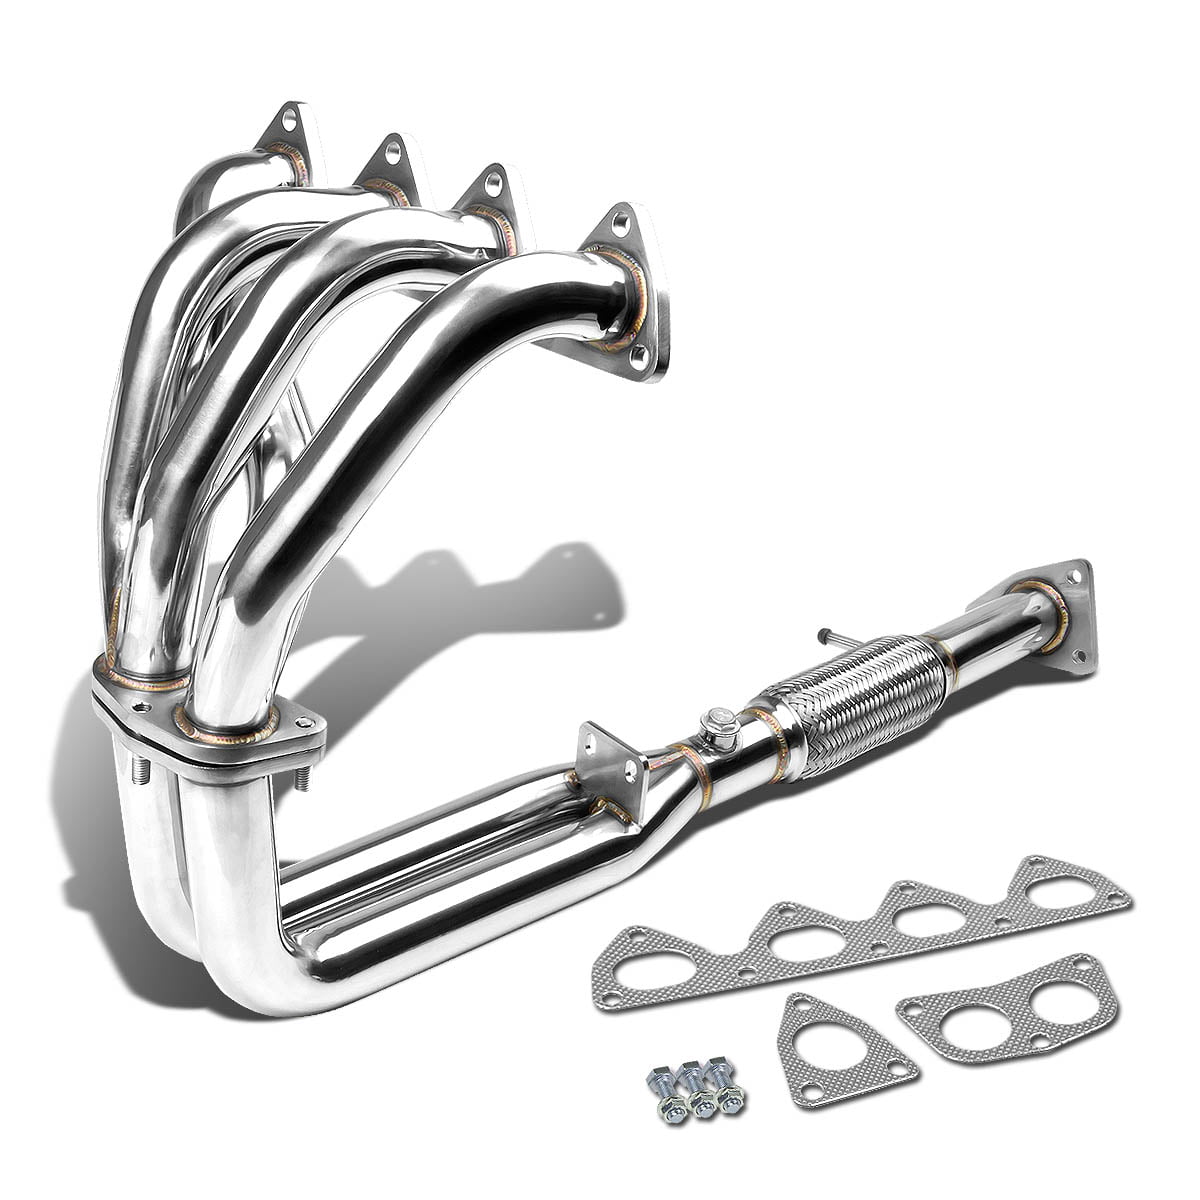 Details about   J2 FOR ACCORD CG PRELUDE BB RED BRUSHED ALUMINUM HEADER MANIFOLD CUP WASHER+BOLT 